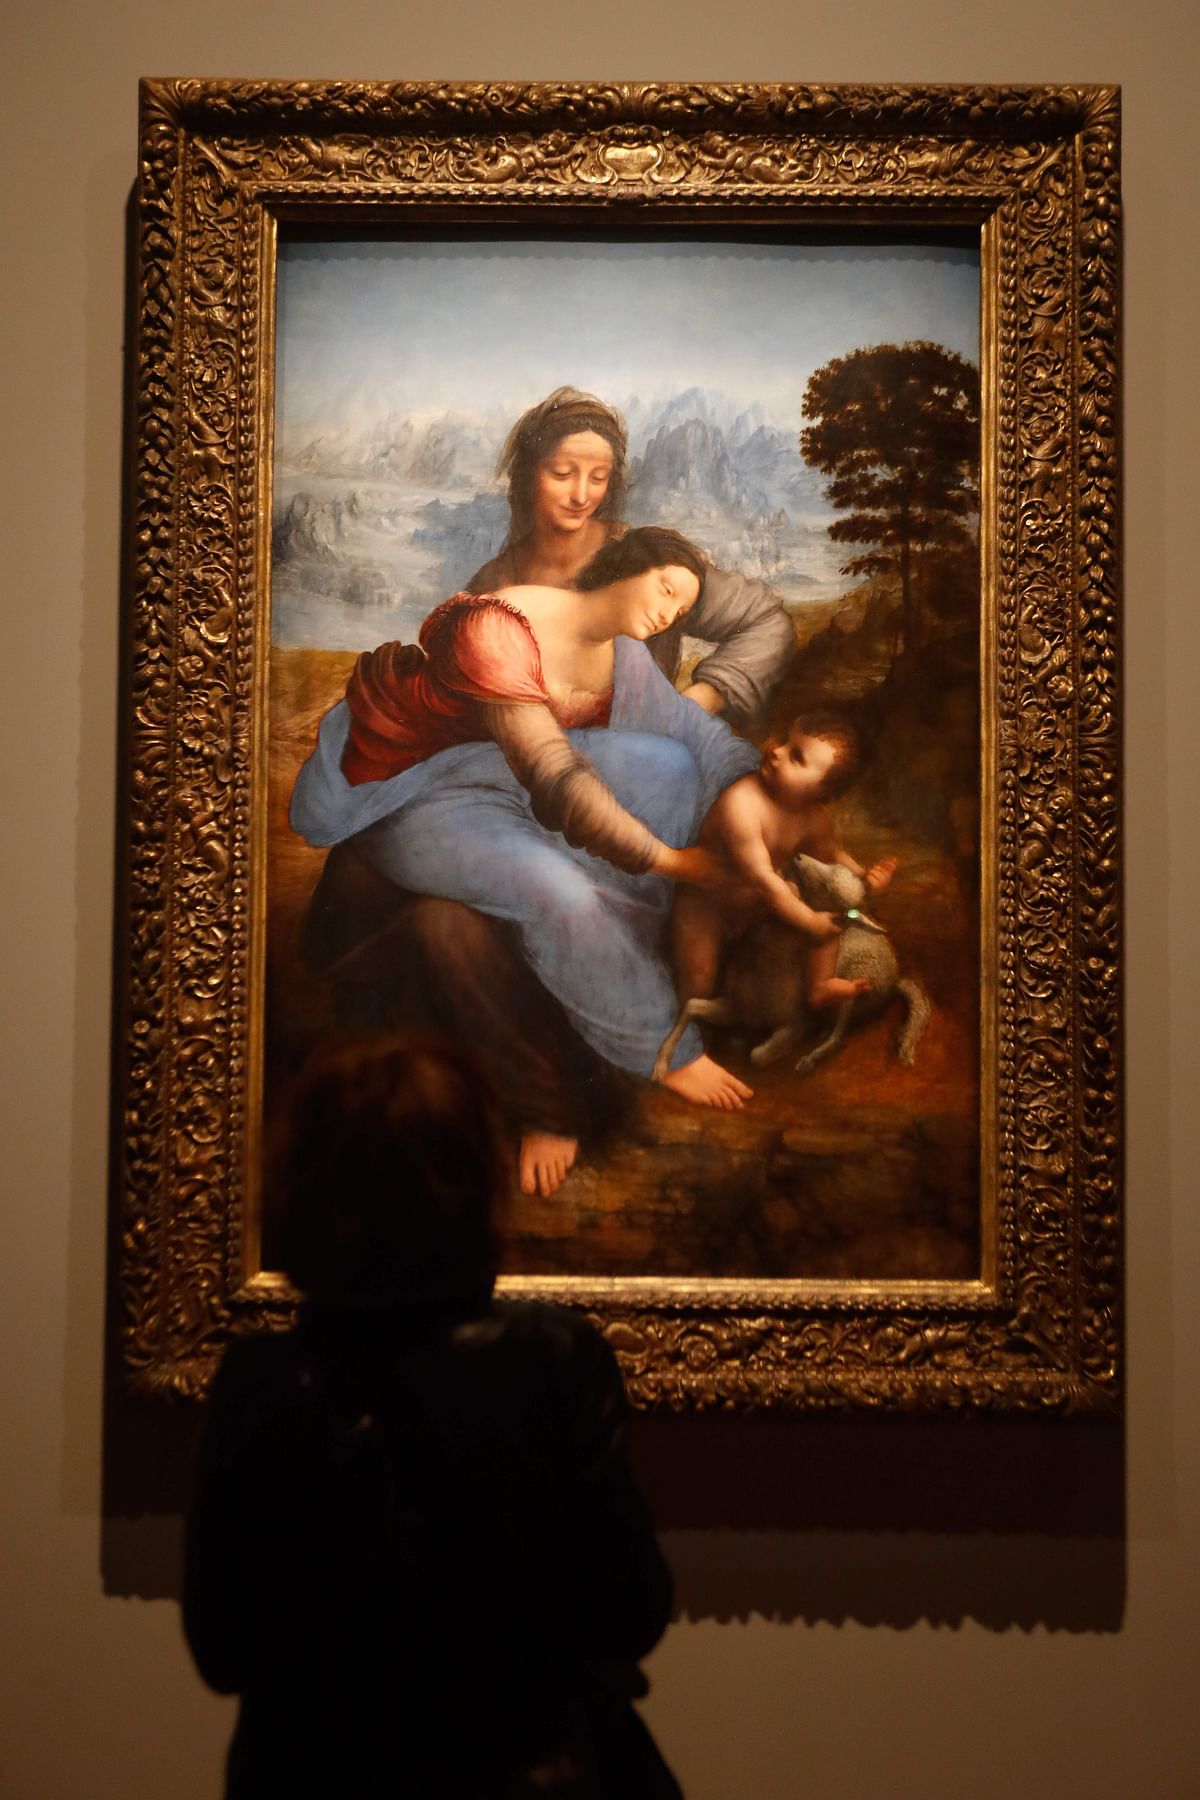 A woman looks at an oil painting by Leonardo da Vinci`s ` The Virgin and Child with Saint Anne `, during the opening of the exhibition ` Leonardo da Vinci `, on 22 October 2019 at the Louvre museum in Paris. Photo: AFP